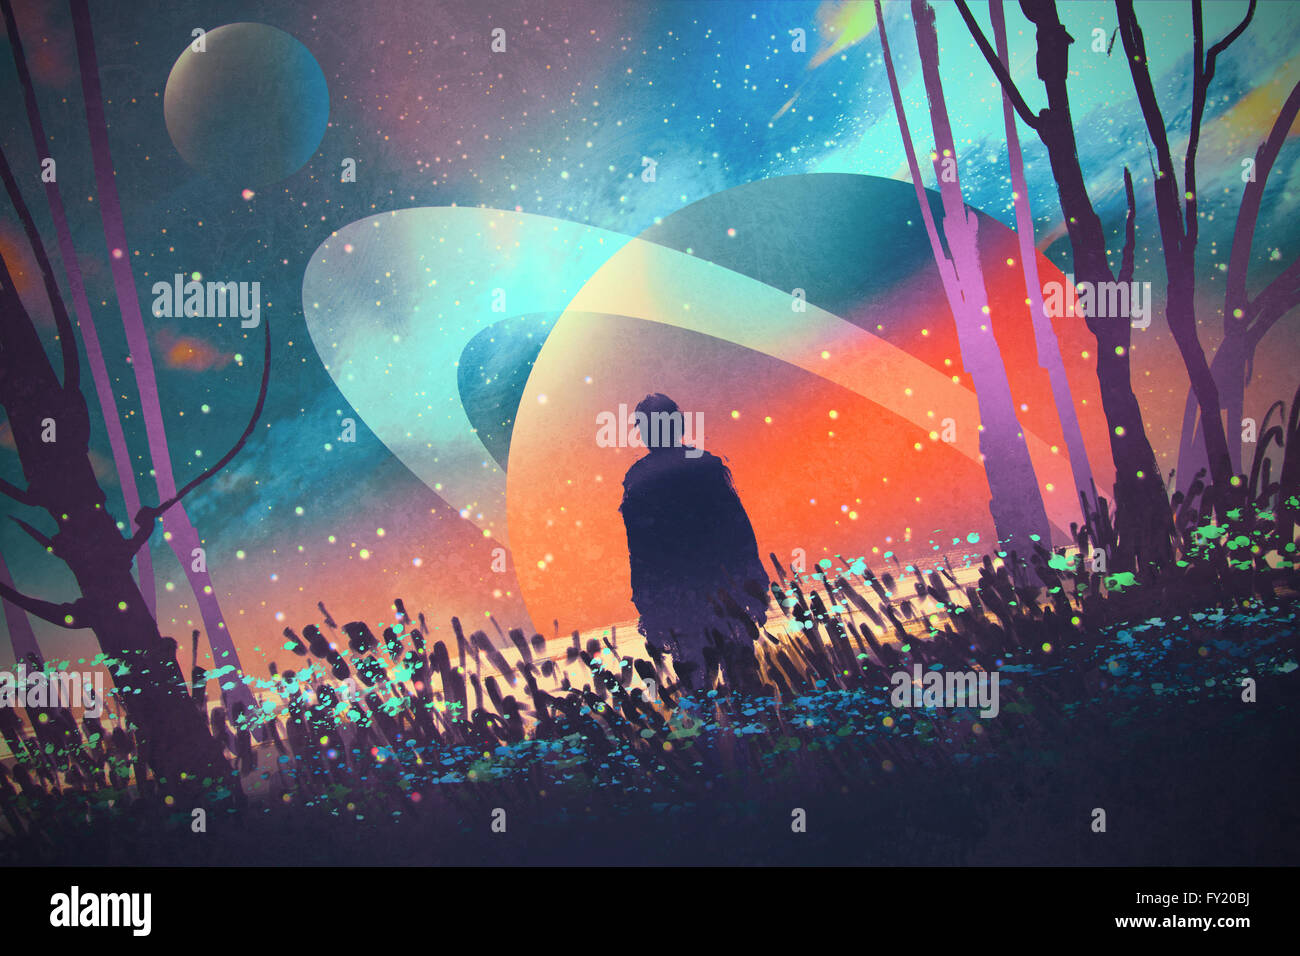 man standing alone in forest with fictional planets background,illustration Stock Photo